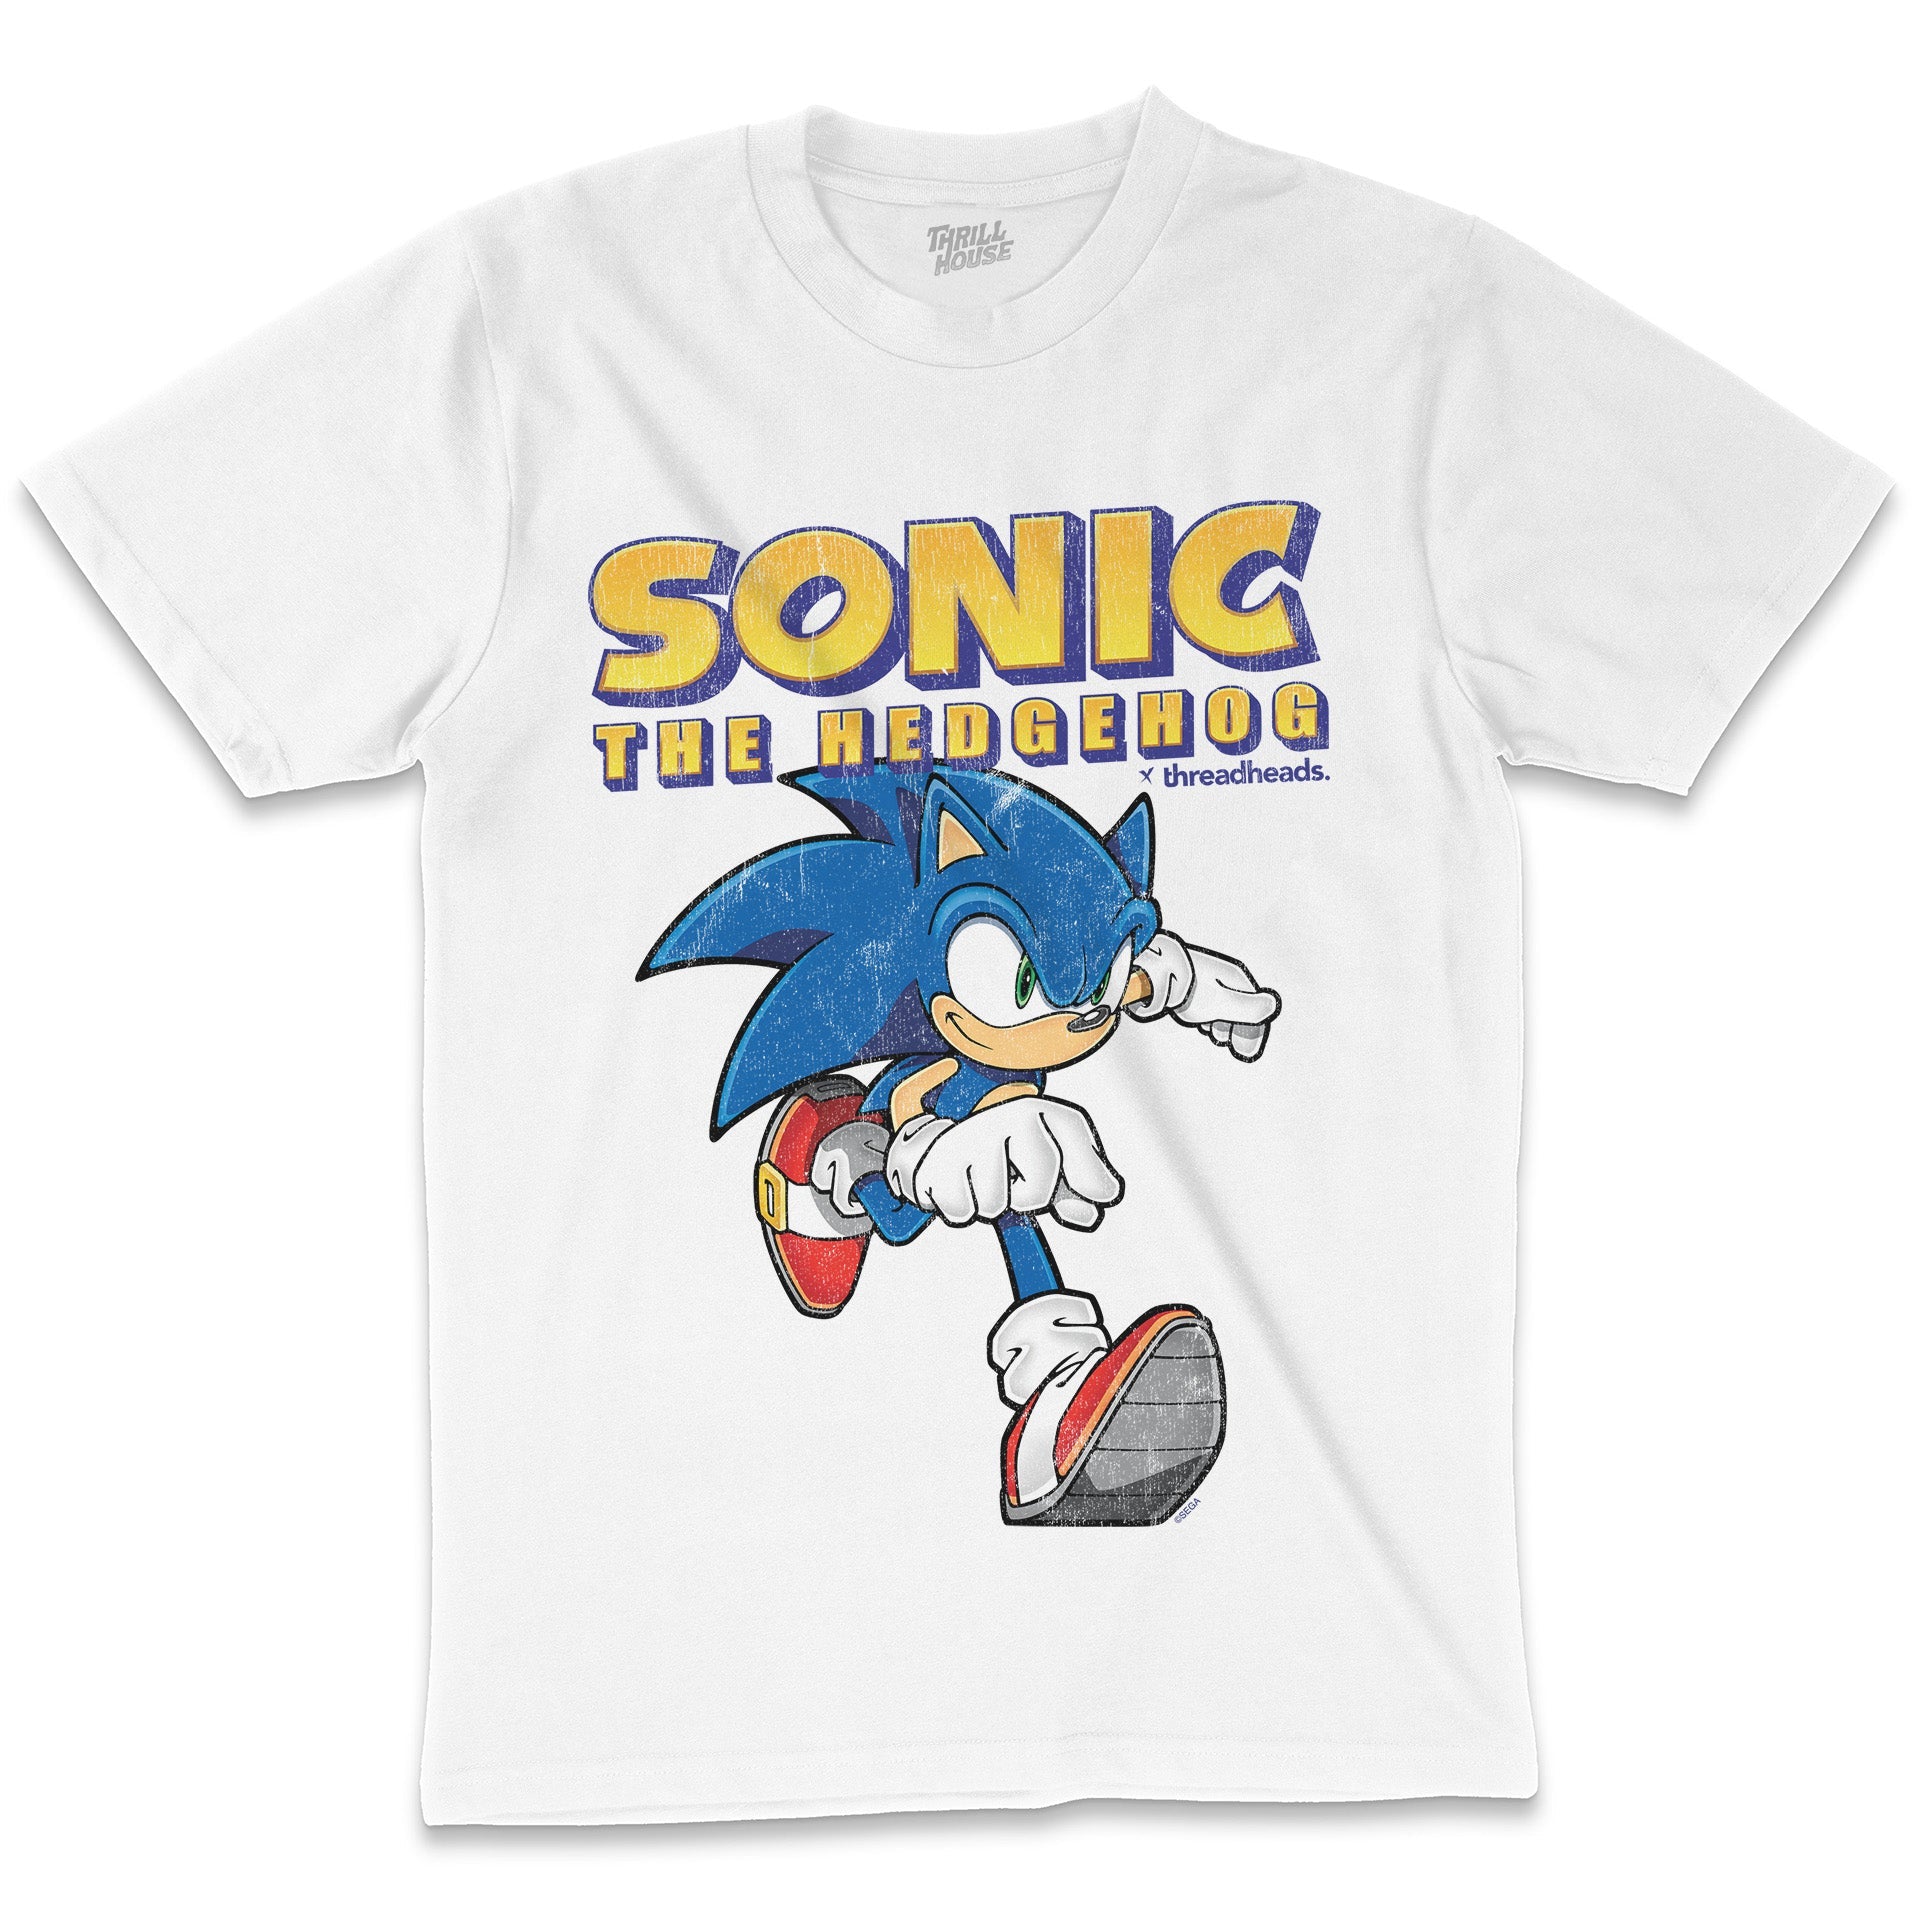 Sonic The Hedgehog On the Run Retro 90s Video Game Cartridge Console Officially Licensed SEGA T-Shirt